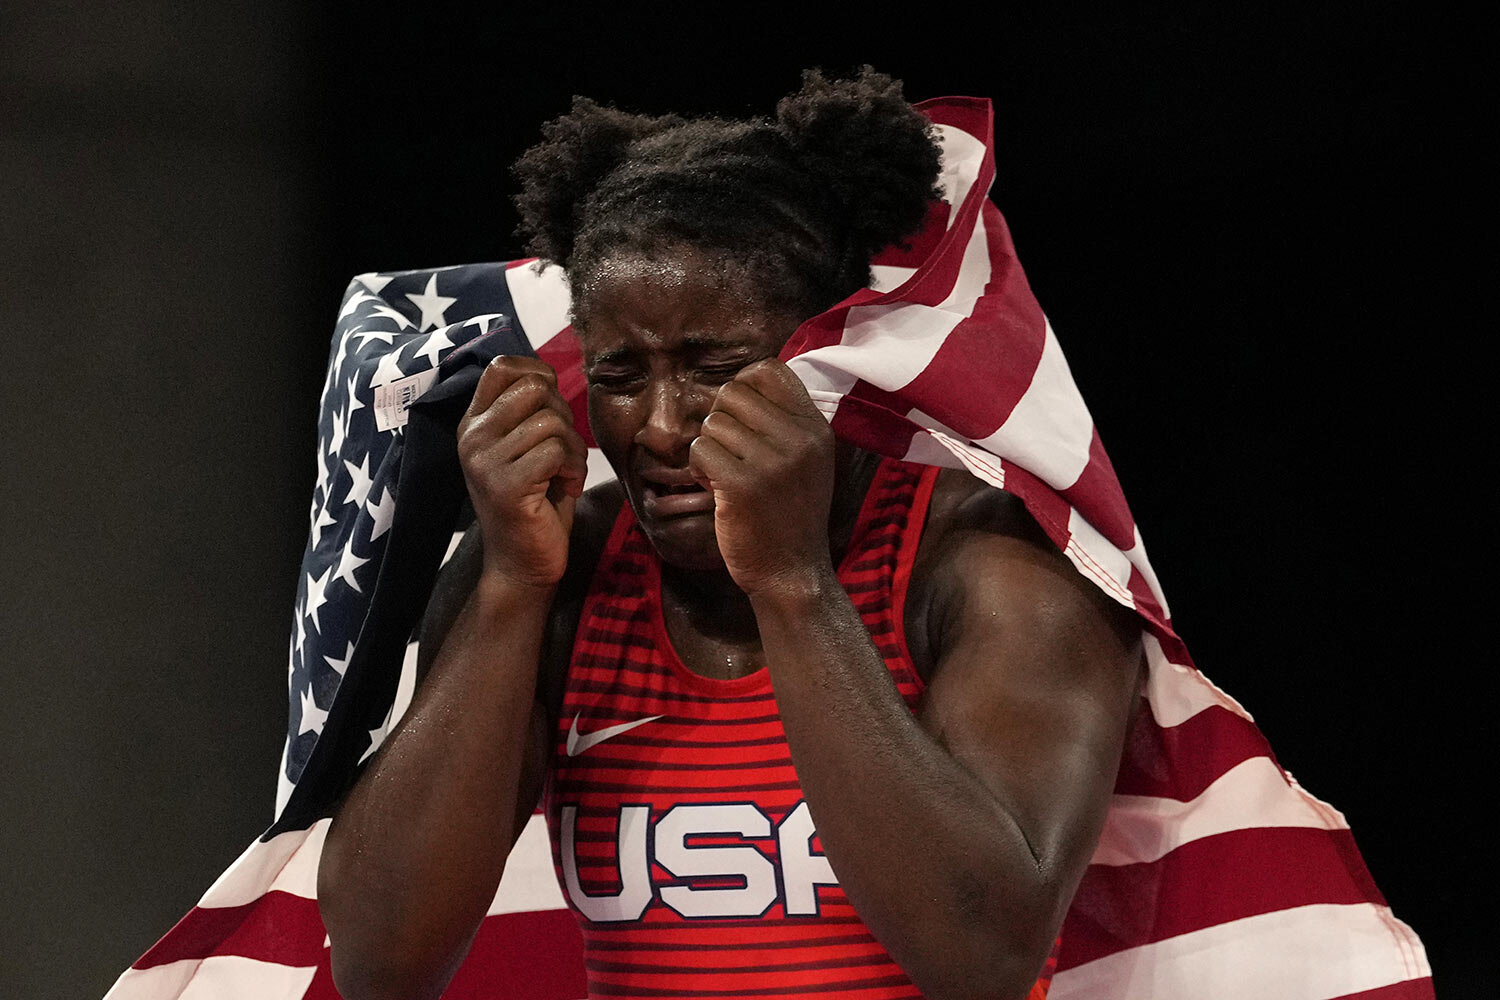  United States Tamyra Marianna Stock Mensah celebrates defeating Nigeria's Blessing Oborududu and winning the women's 68kg Freestyle wrestling final match at the 2020 Summer Olympics, Tuesday, Aug. 3, 2021, in Chiba, Japan. (AP Photo/Aaron Favila) 